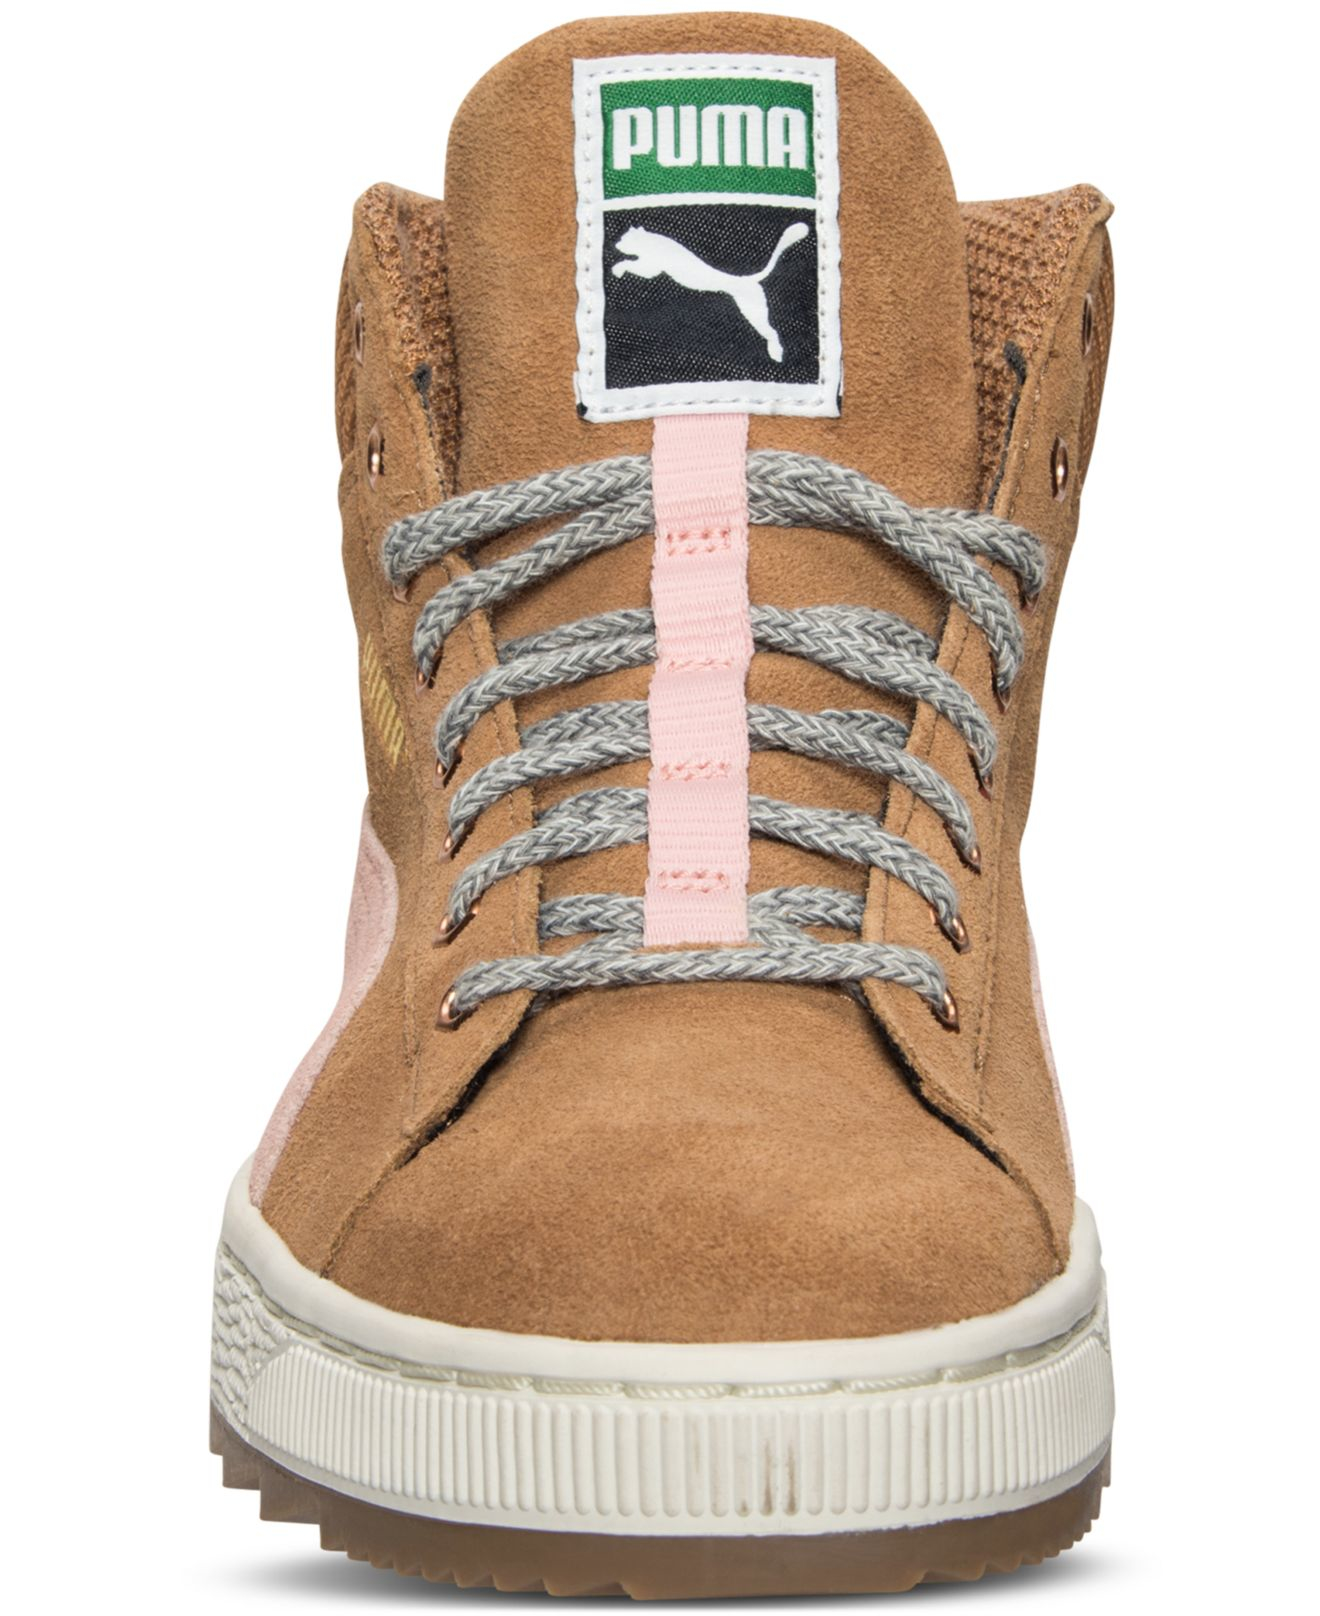 Puma Women S Suede Winterized Rugged Mid Casual Sneakers From Finish Line In Brown Lyst